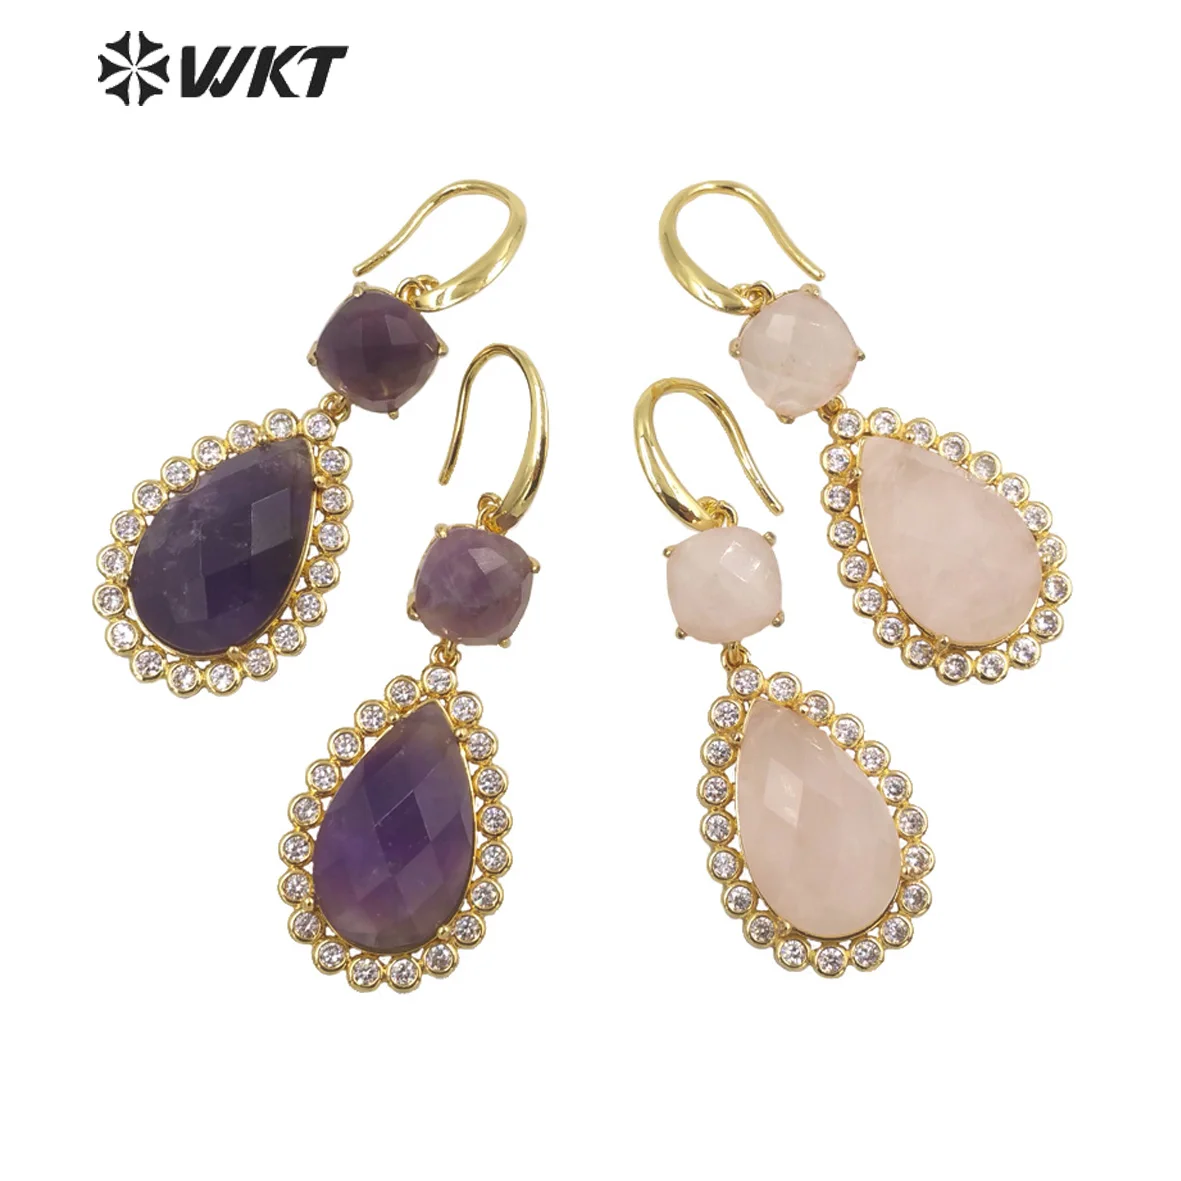 WKT-E697  WKT 2022 High-quality earrings fashion gemstone gold-plated Earrings lady CLASSIC party accessories jewelry trend hot